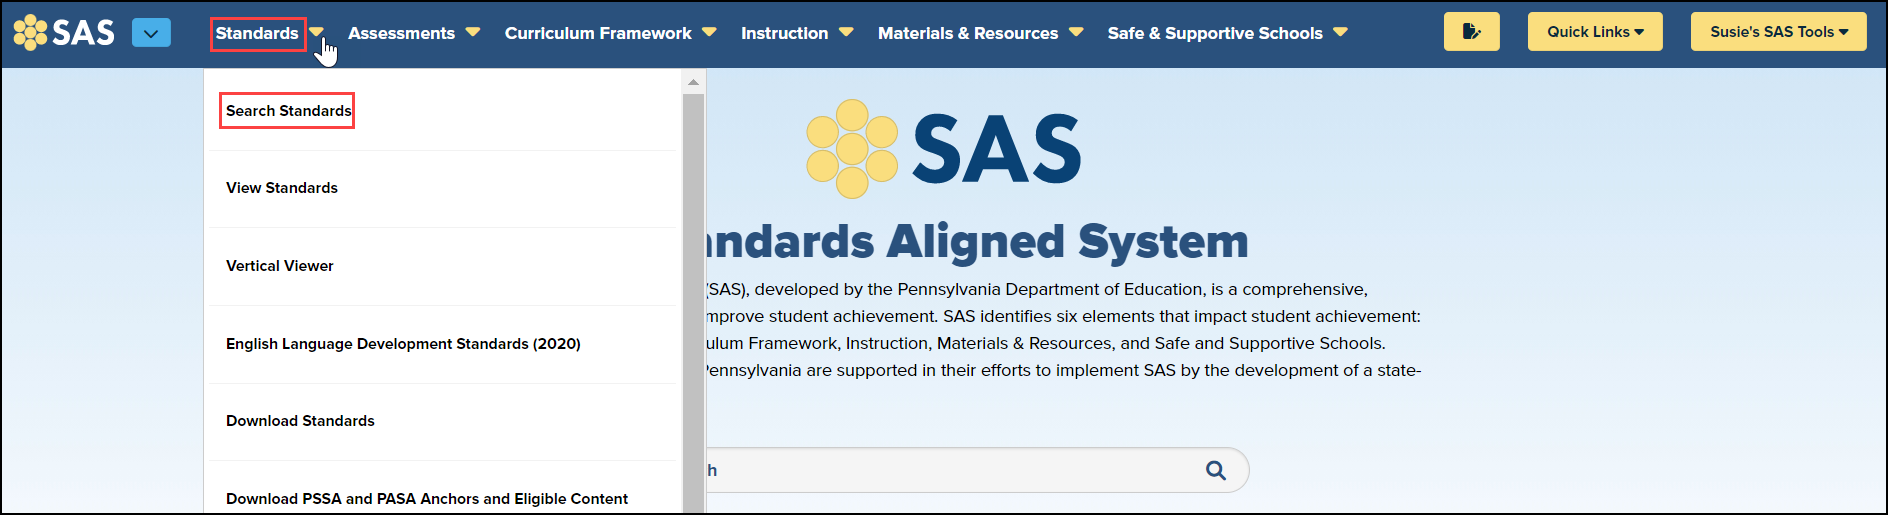 sas site header with standards highlighted and menu expanded with search standards highlighted